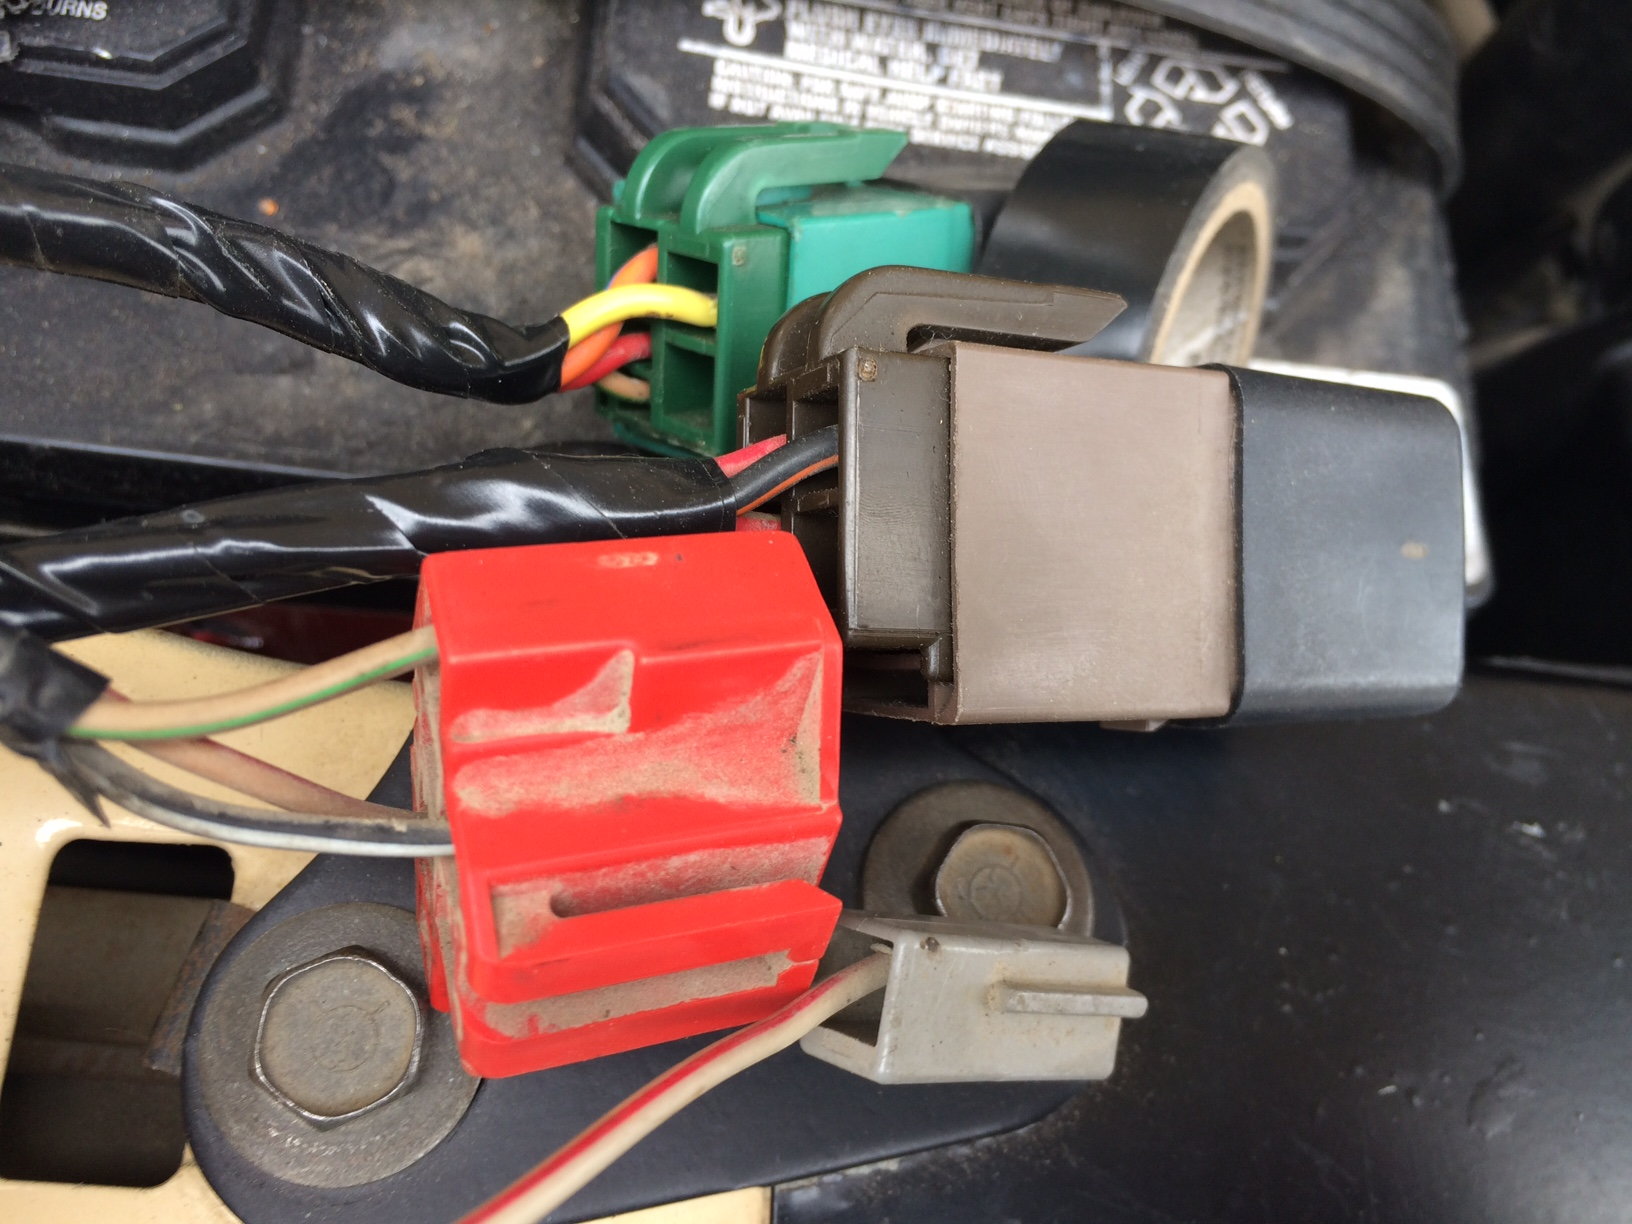 1988 E350 7.5L Wont Start - Page 2 - Ford Truck Enthusiasts Forums 1988 Ford E350 Fuel Pump Relay Location